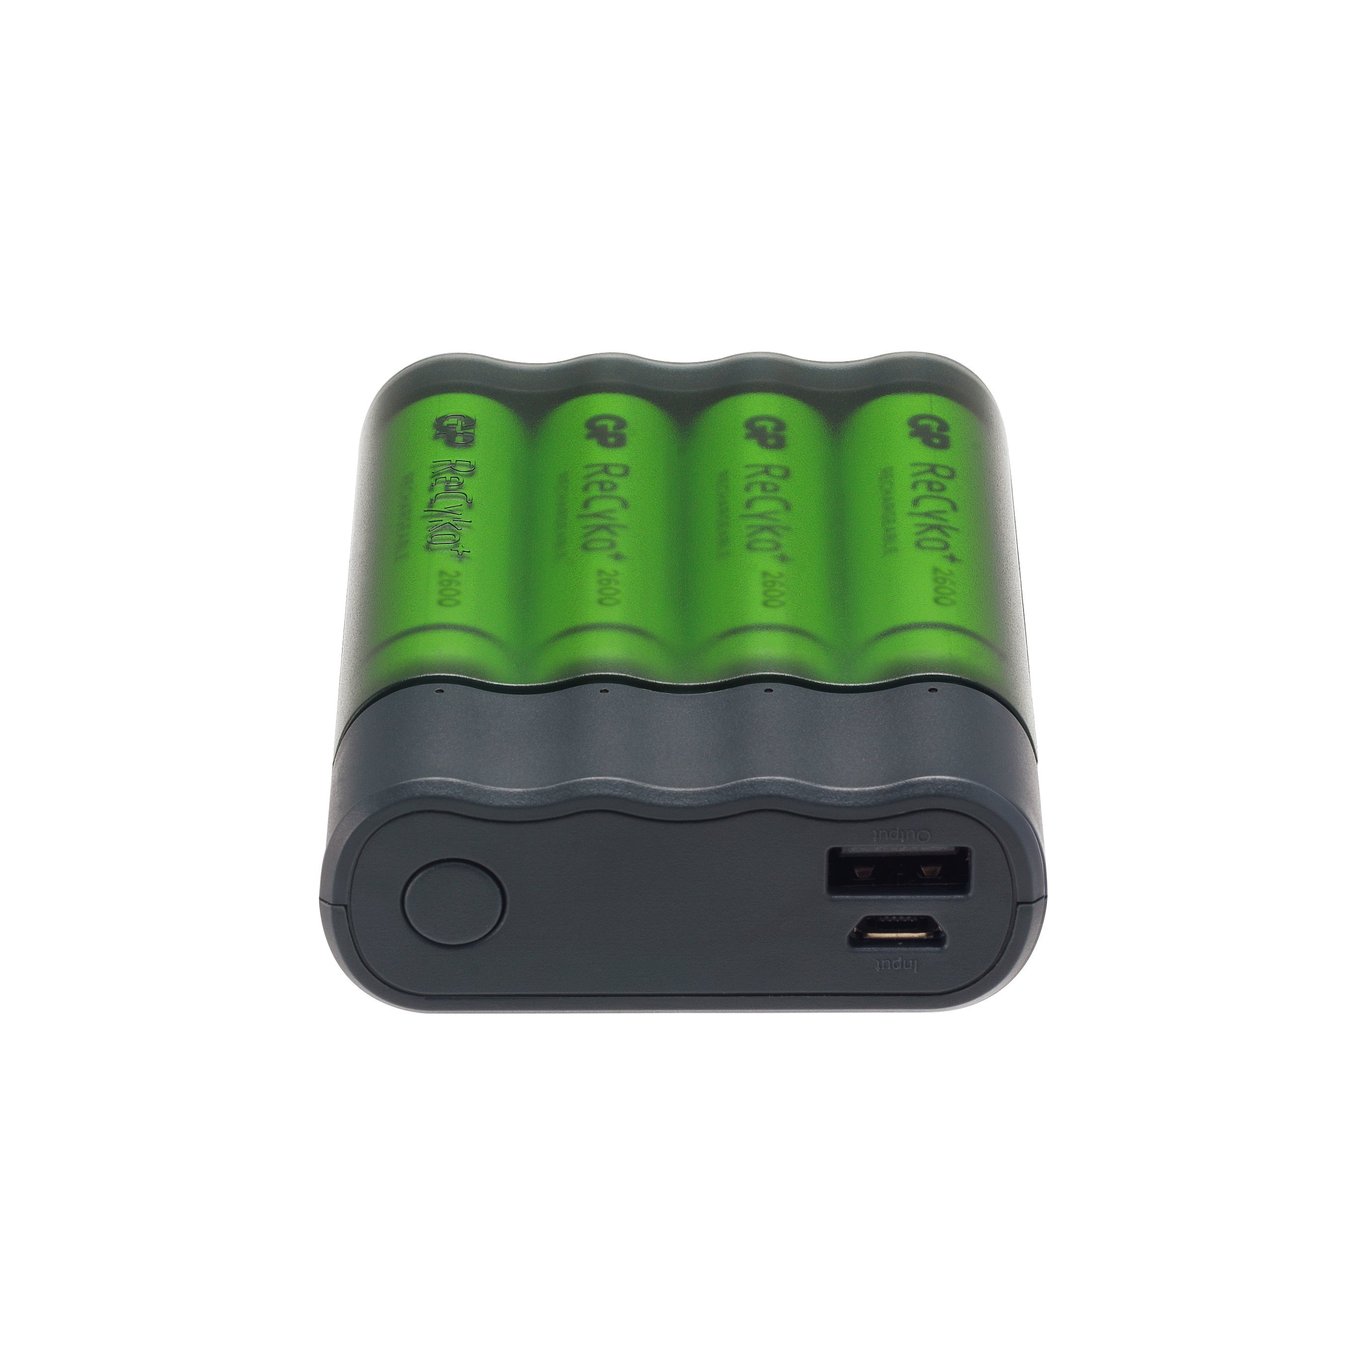 Laddare/Powerbank GP Charge AnyWay inkl 4 AA batterier 39430050_1